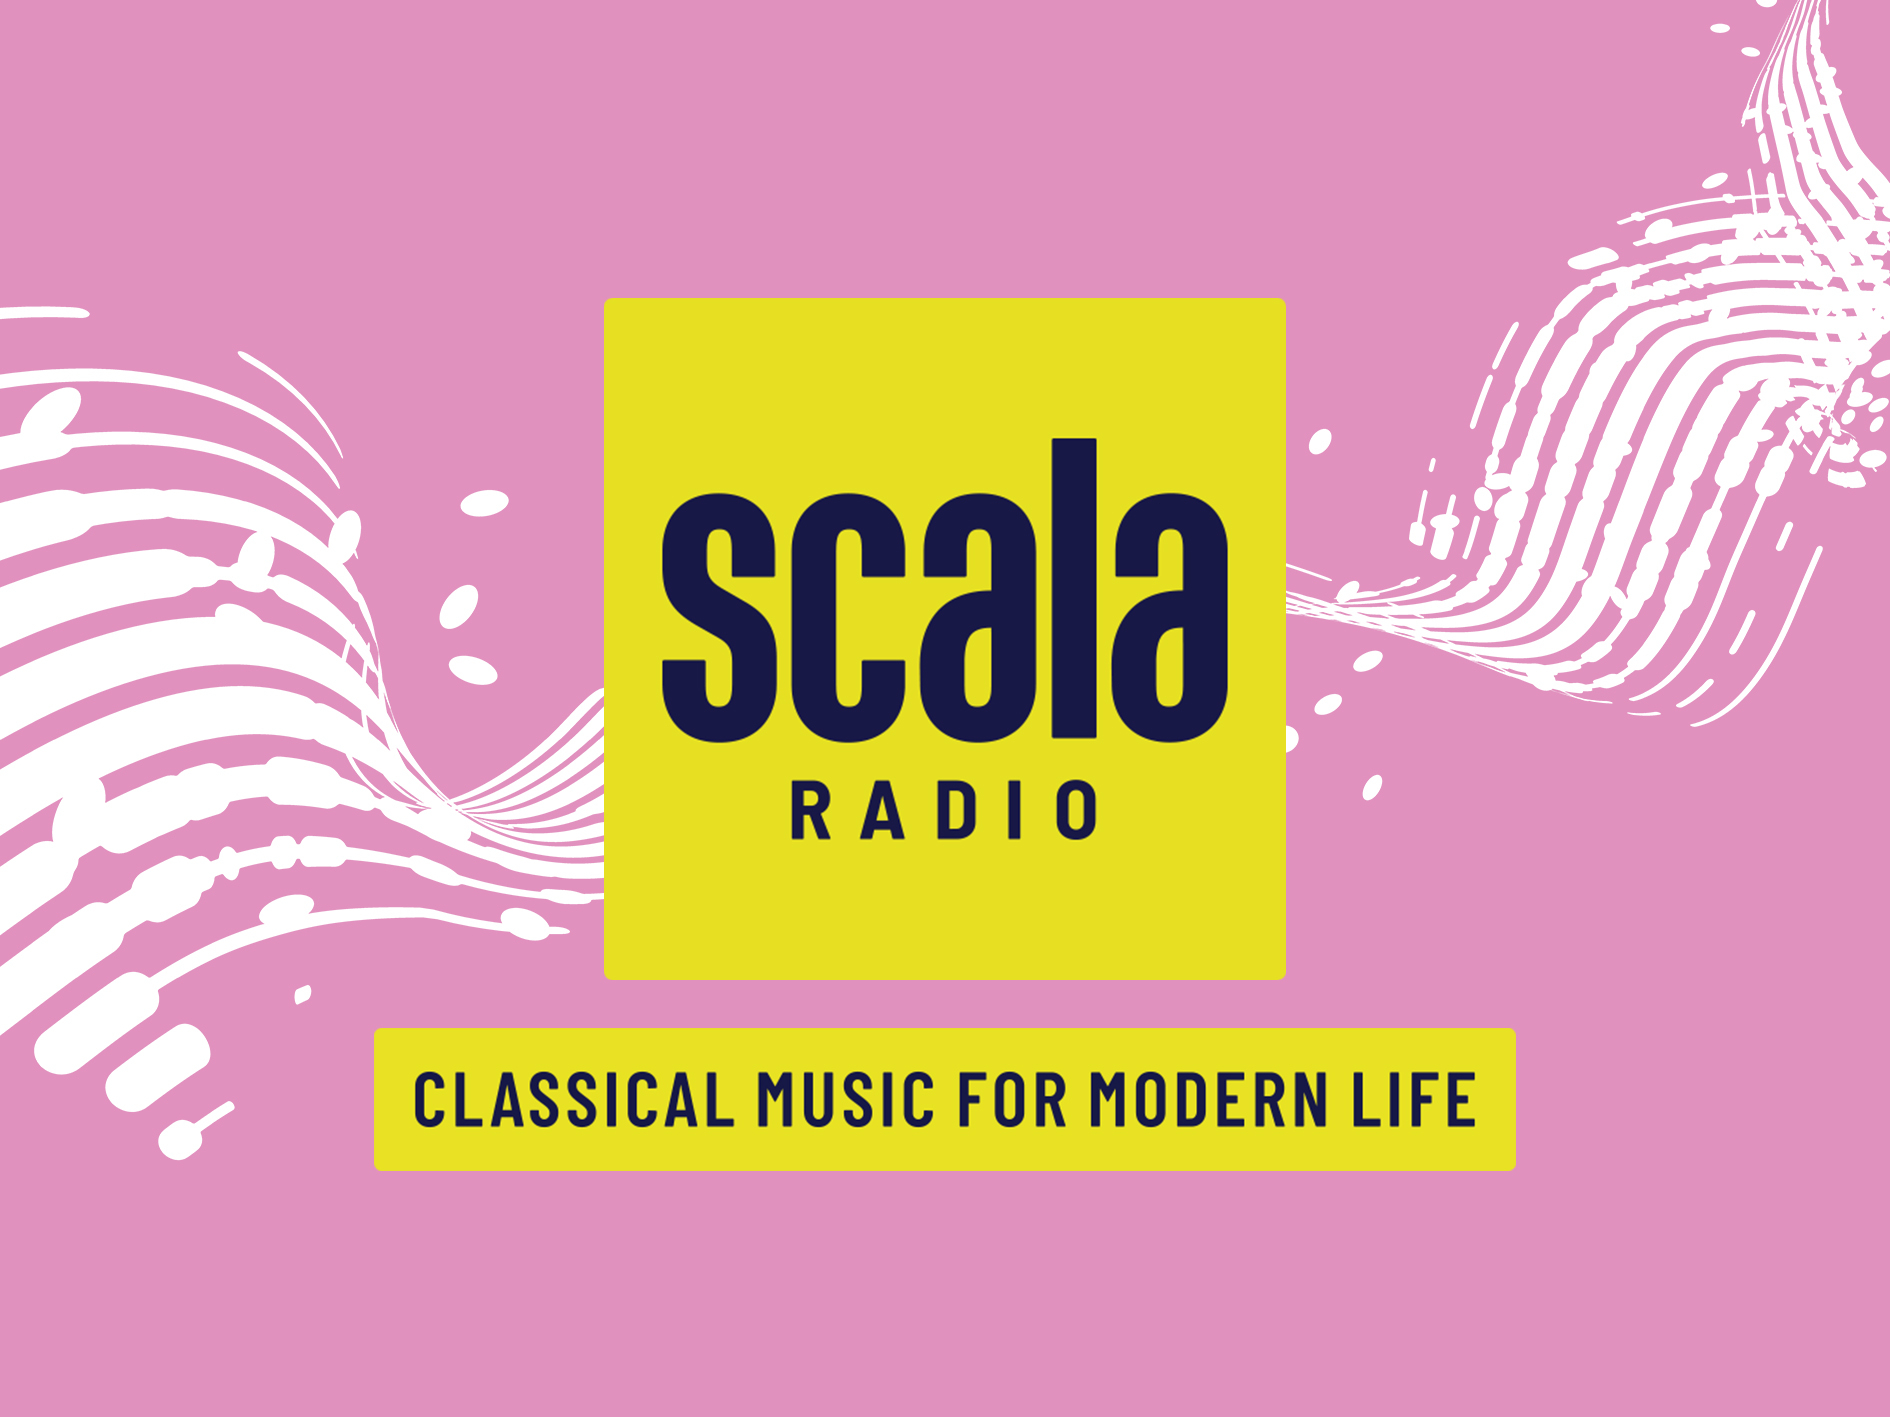 Scala Radio announces more targeted music curation as it unveils new schedule